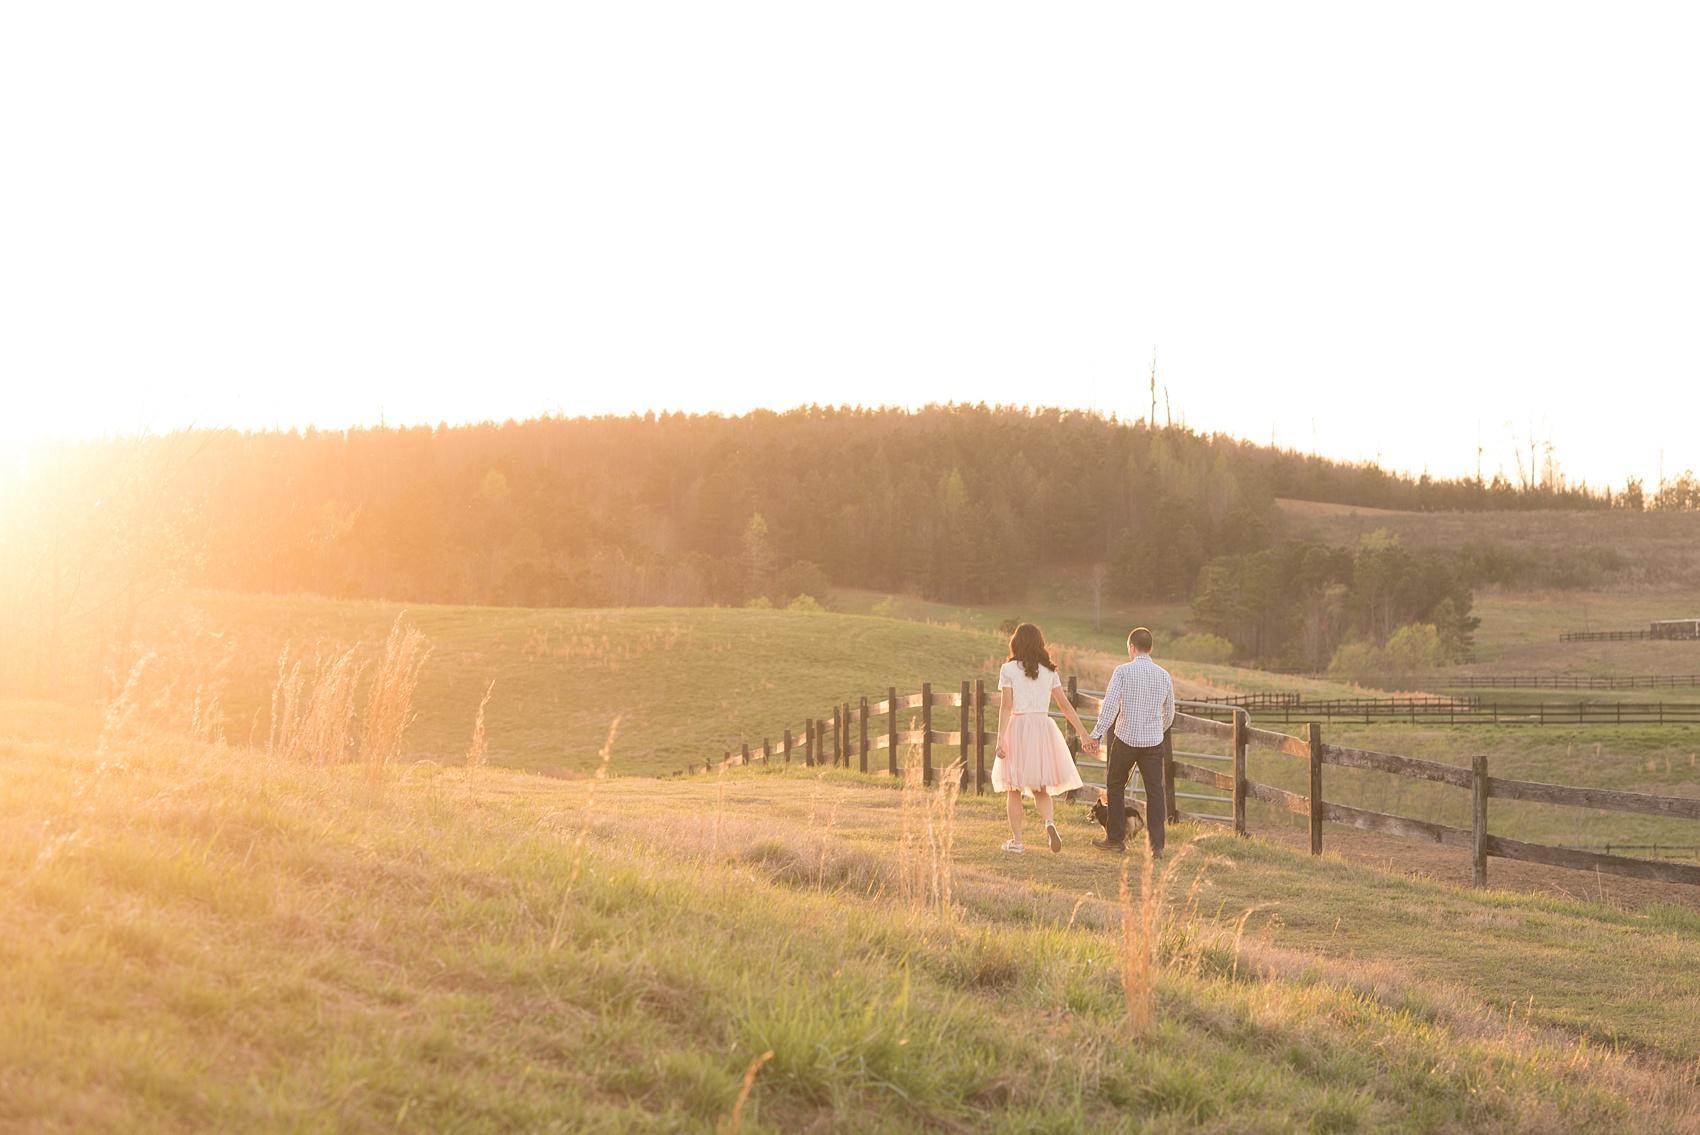 Raleigh farm engagement photos during the golden hour with rolling hills during the golden hour. Images by Mikkel Paige Photography.